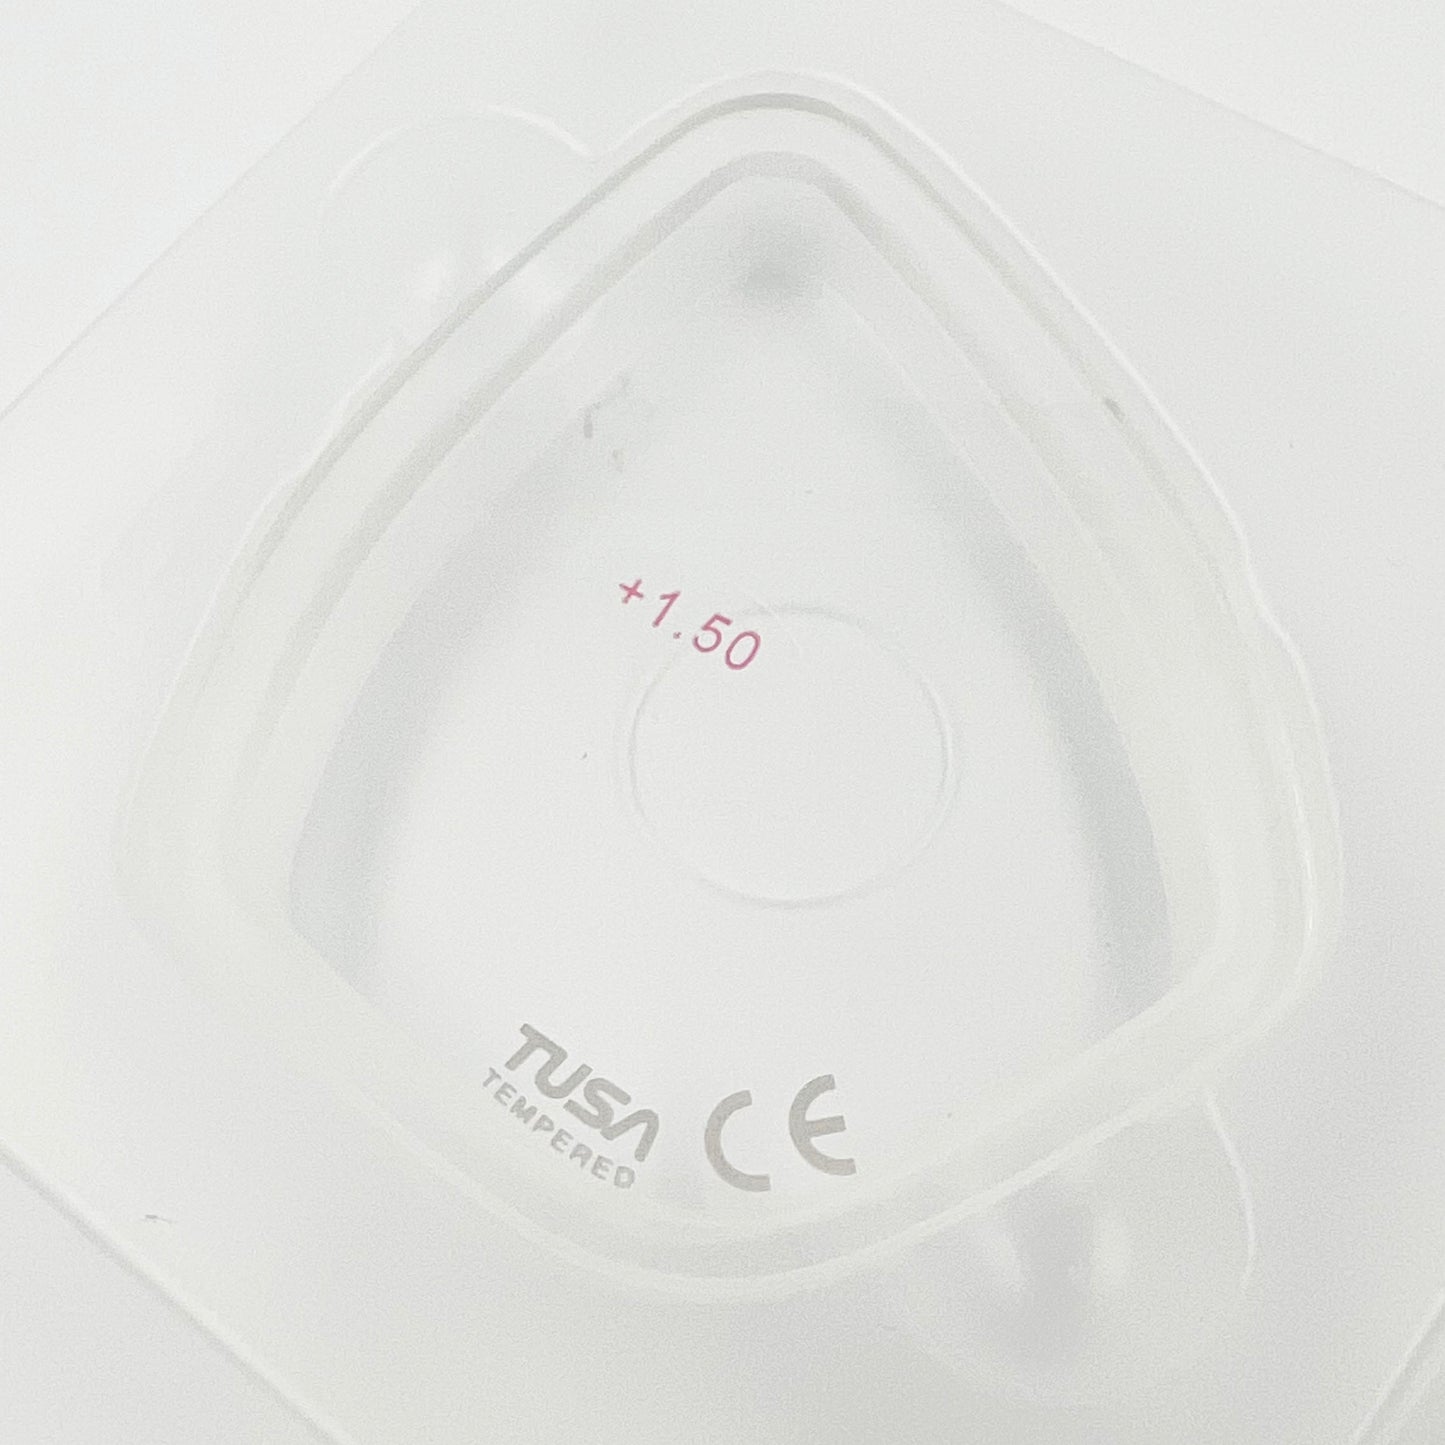 Tusa Corrective Lens Fits most diving mask with drop-shaped lenses